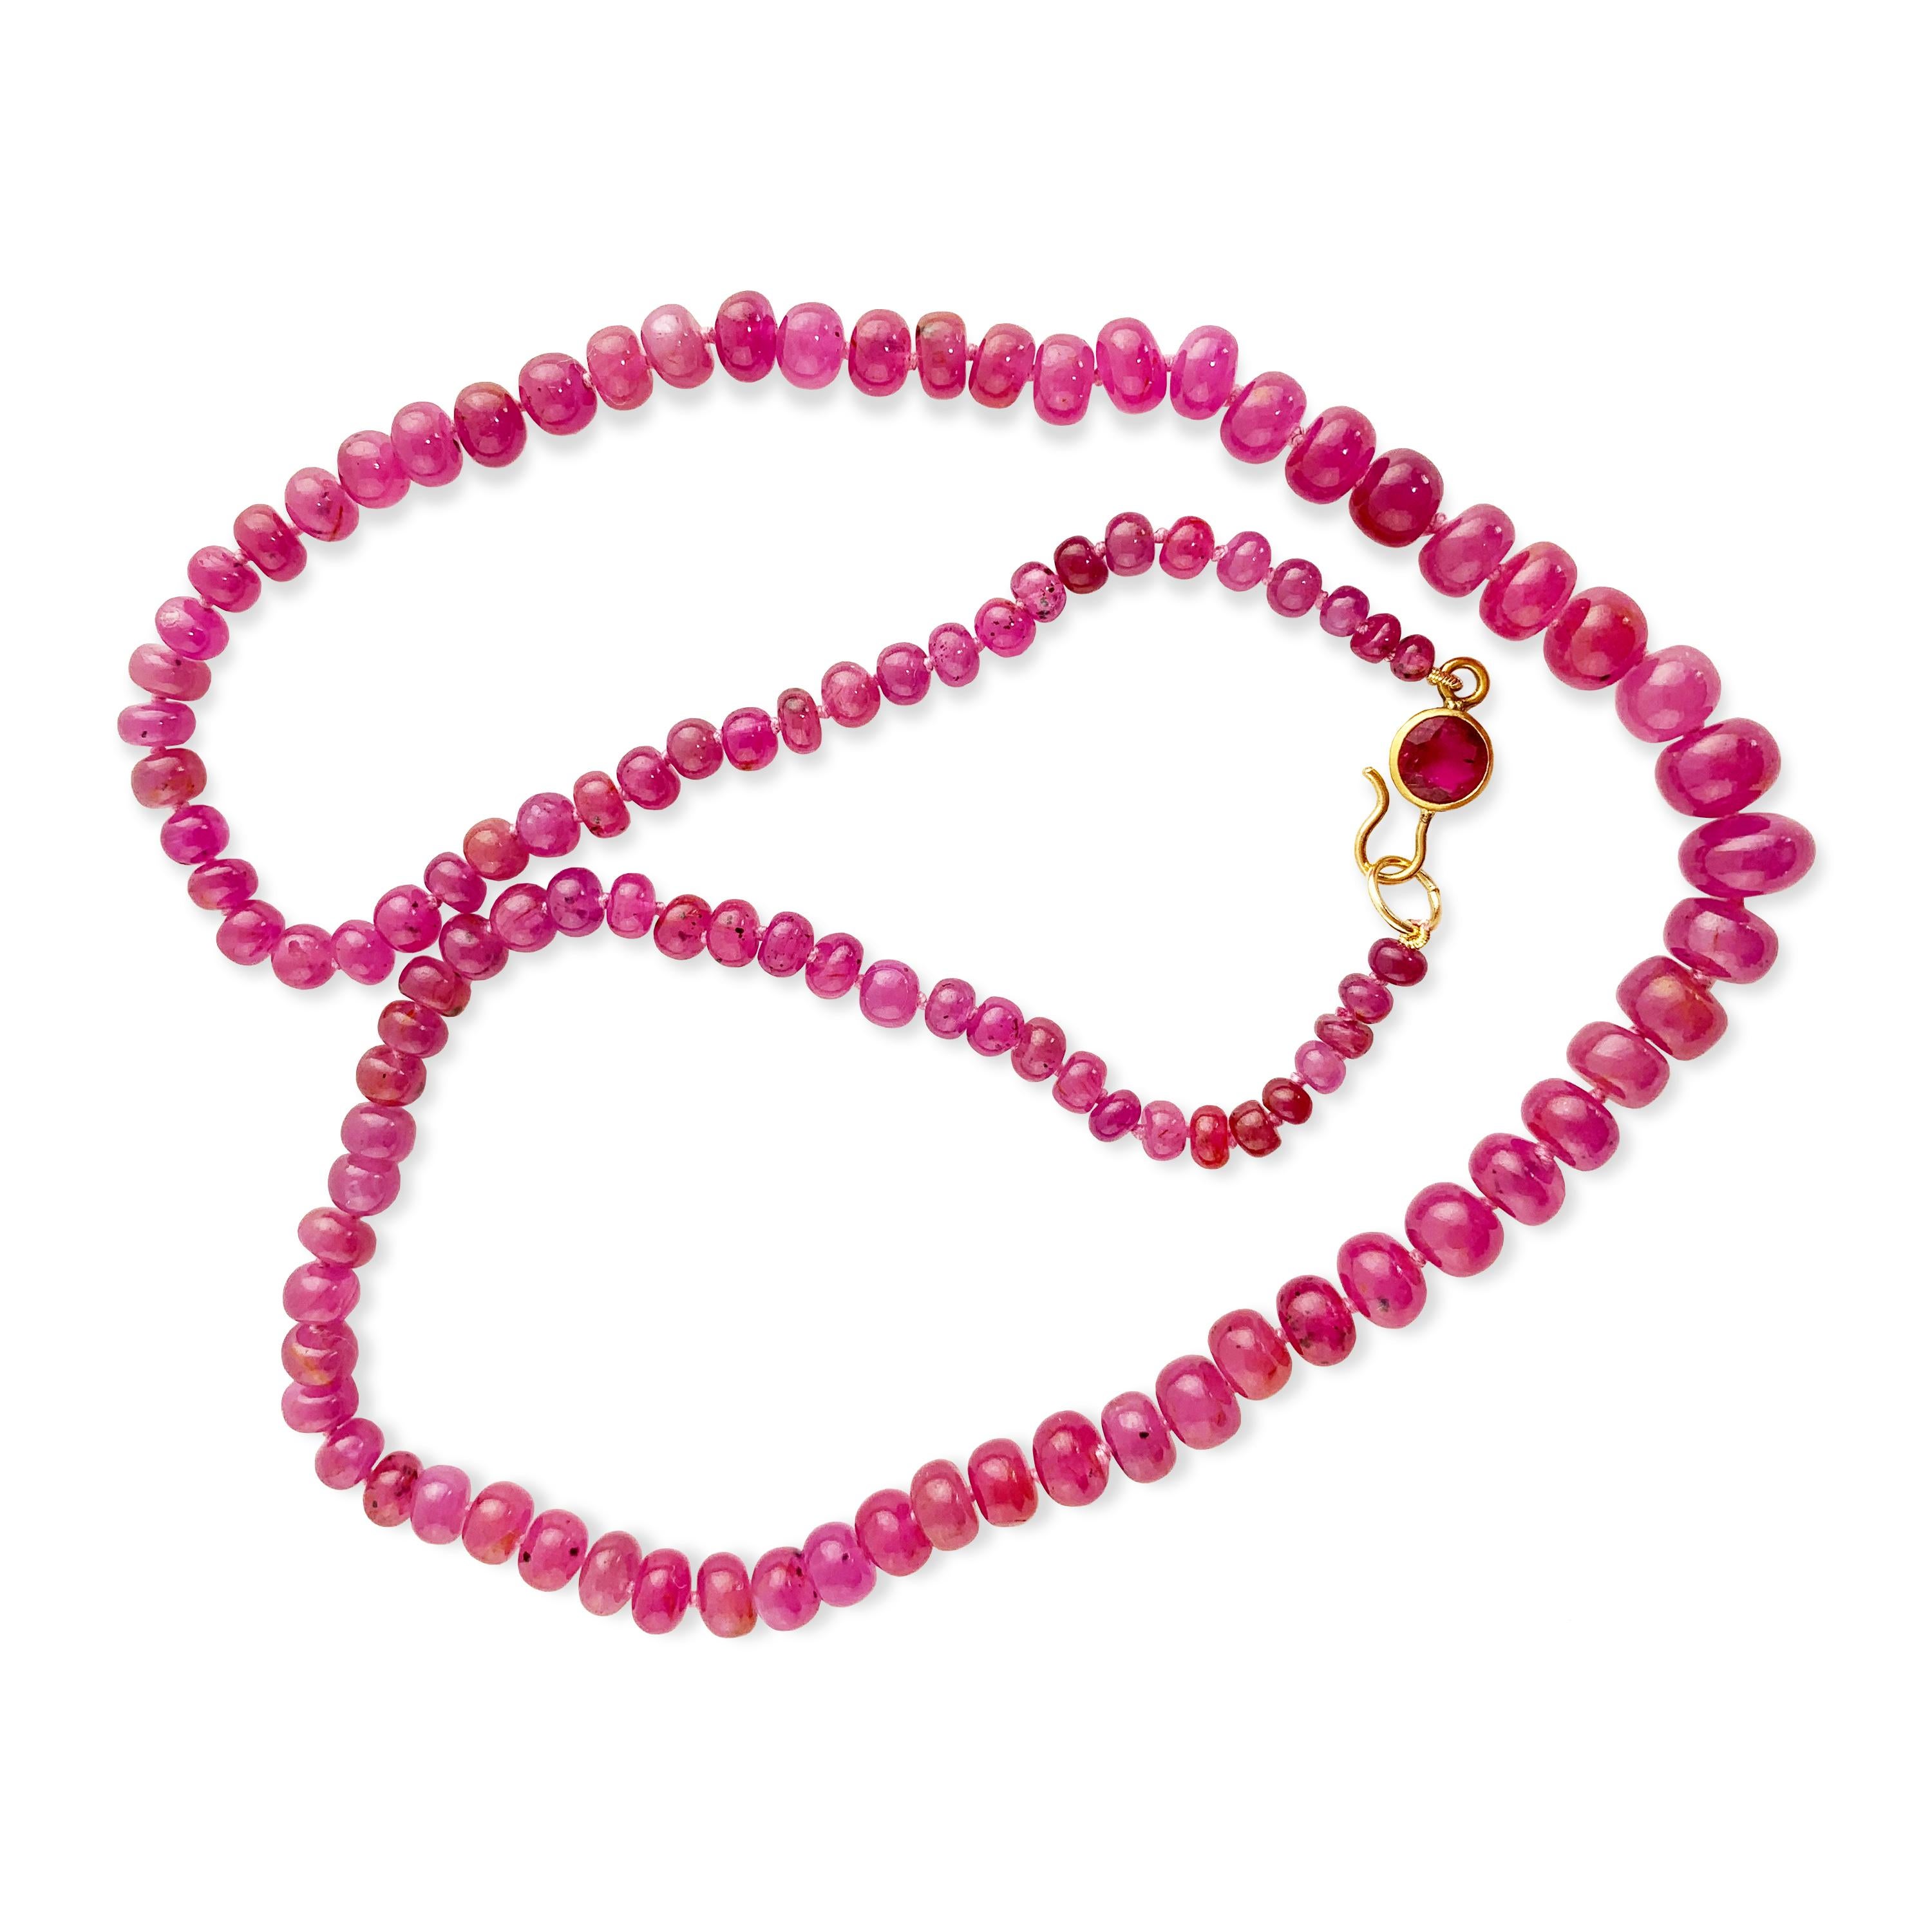 Ruby beaded necklace with a rubellite tourmaline clasp set in 22k gold,  Measuring 22